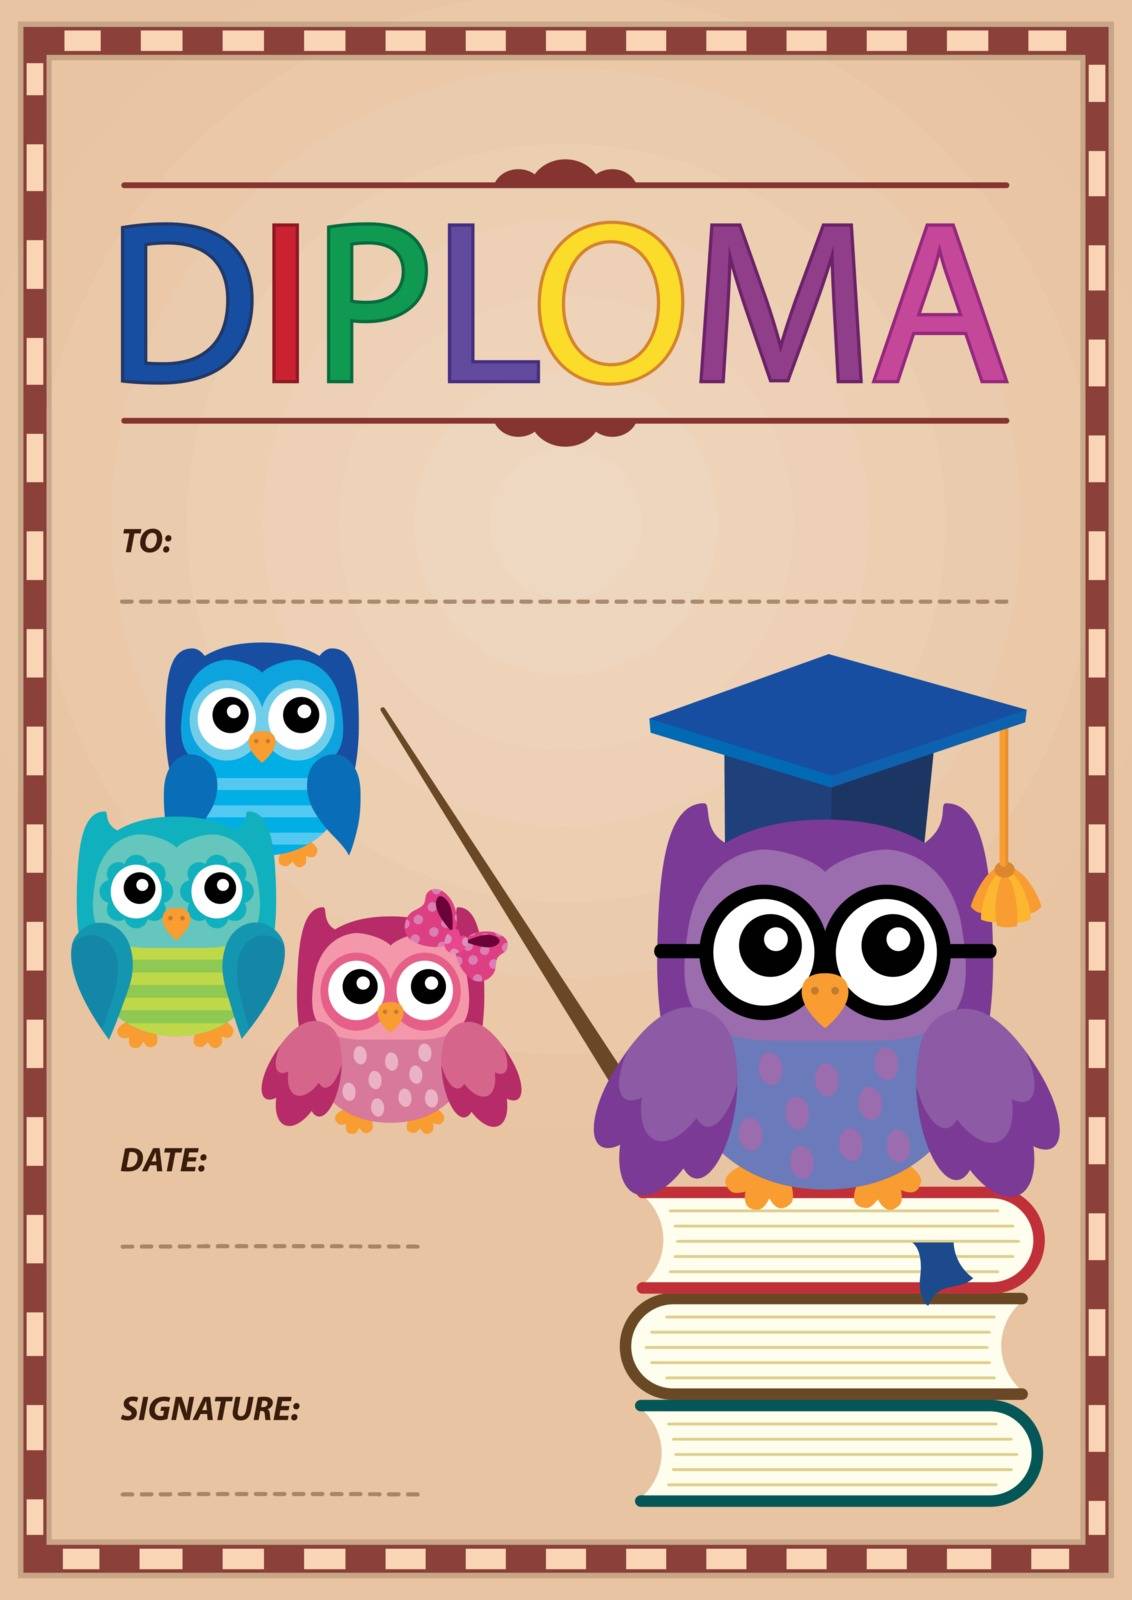 Diploma thematics image 4 by clairev